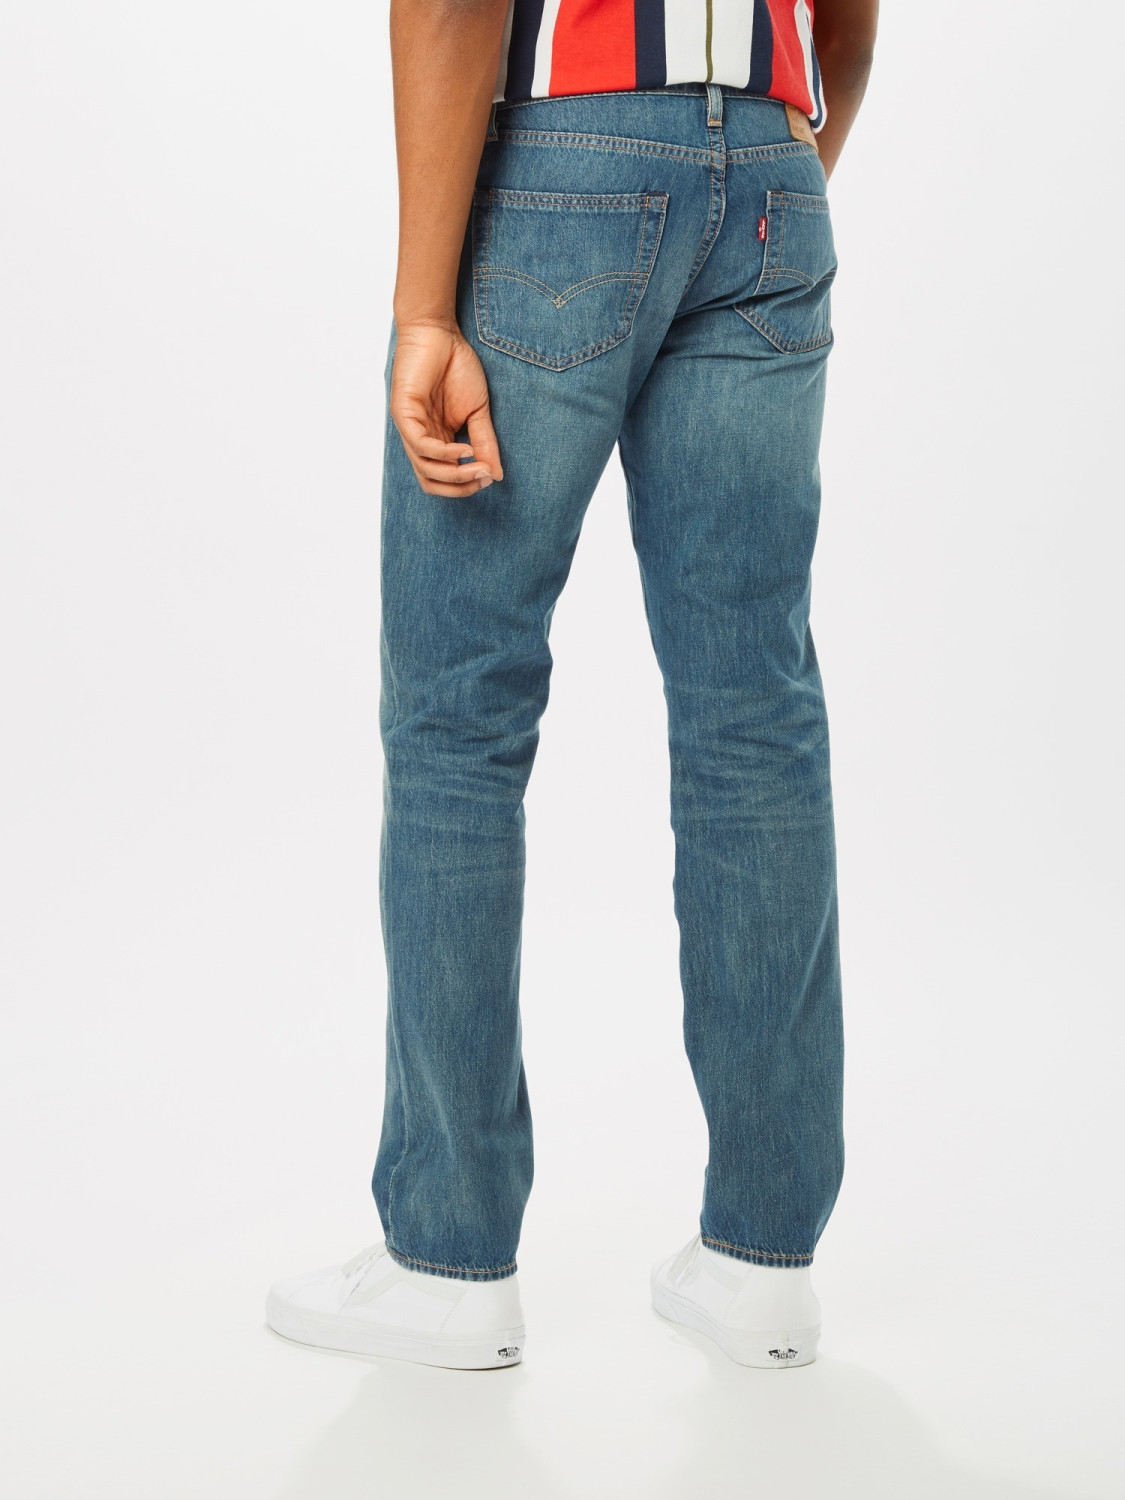 Buy Levi's 511 Slim Fit Men cioccolato cool from £90.00 (Today) – Best ...